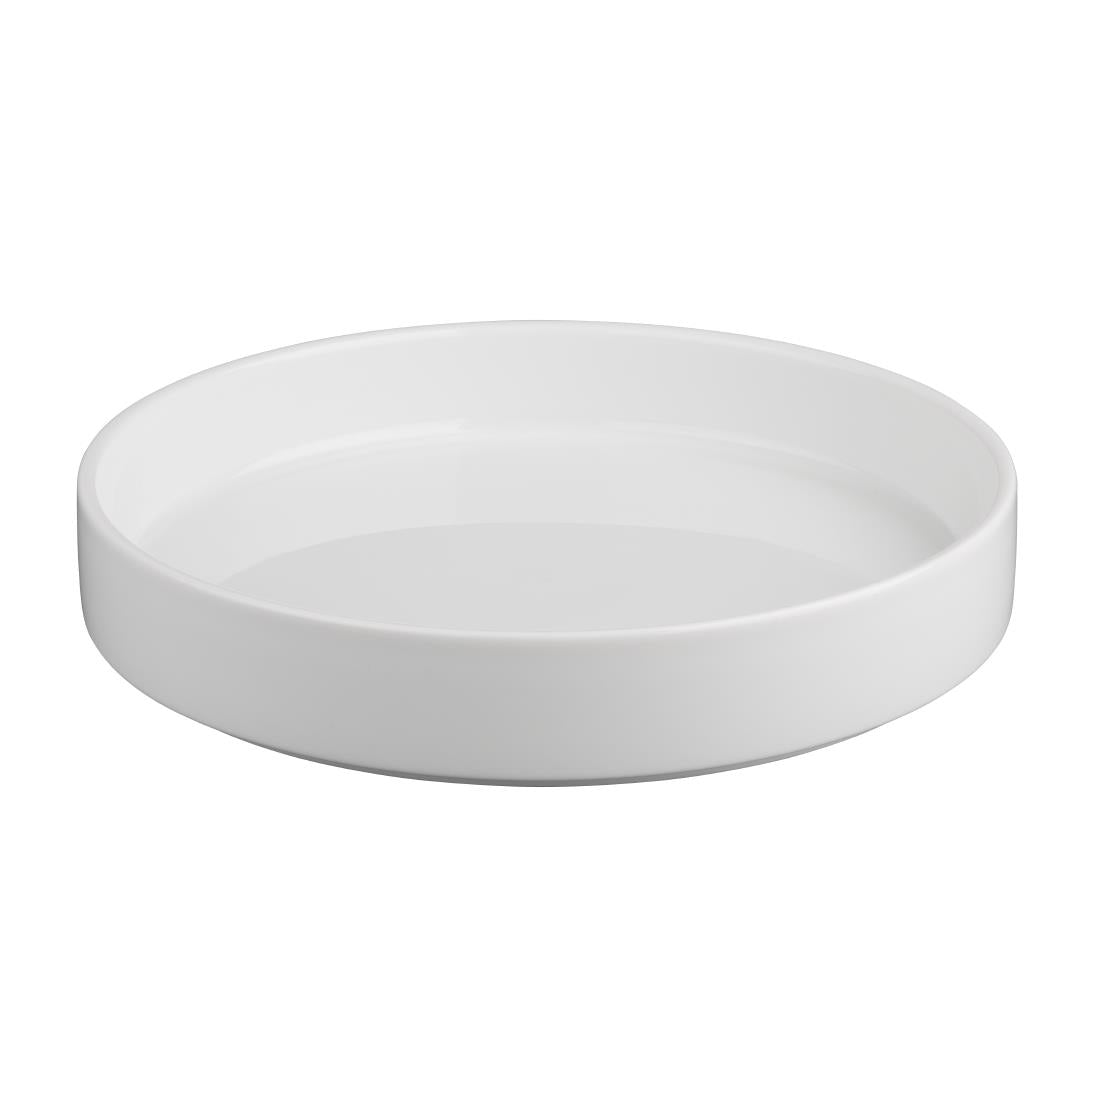 CK072 Olympia Whiteware Flat Walled Bowl - 270mm 10 2/3" (Box of 4)